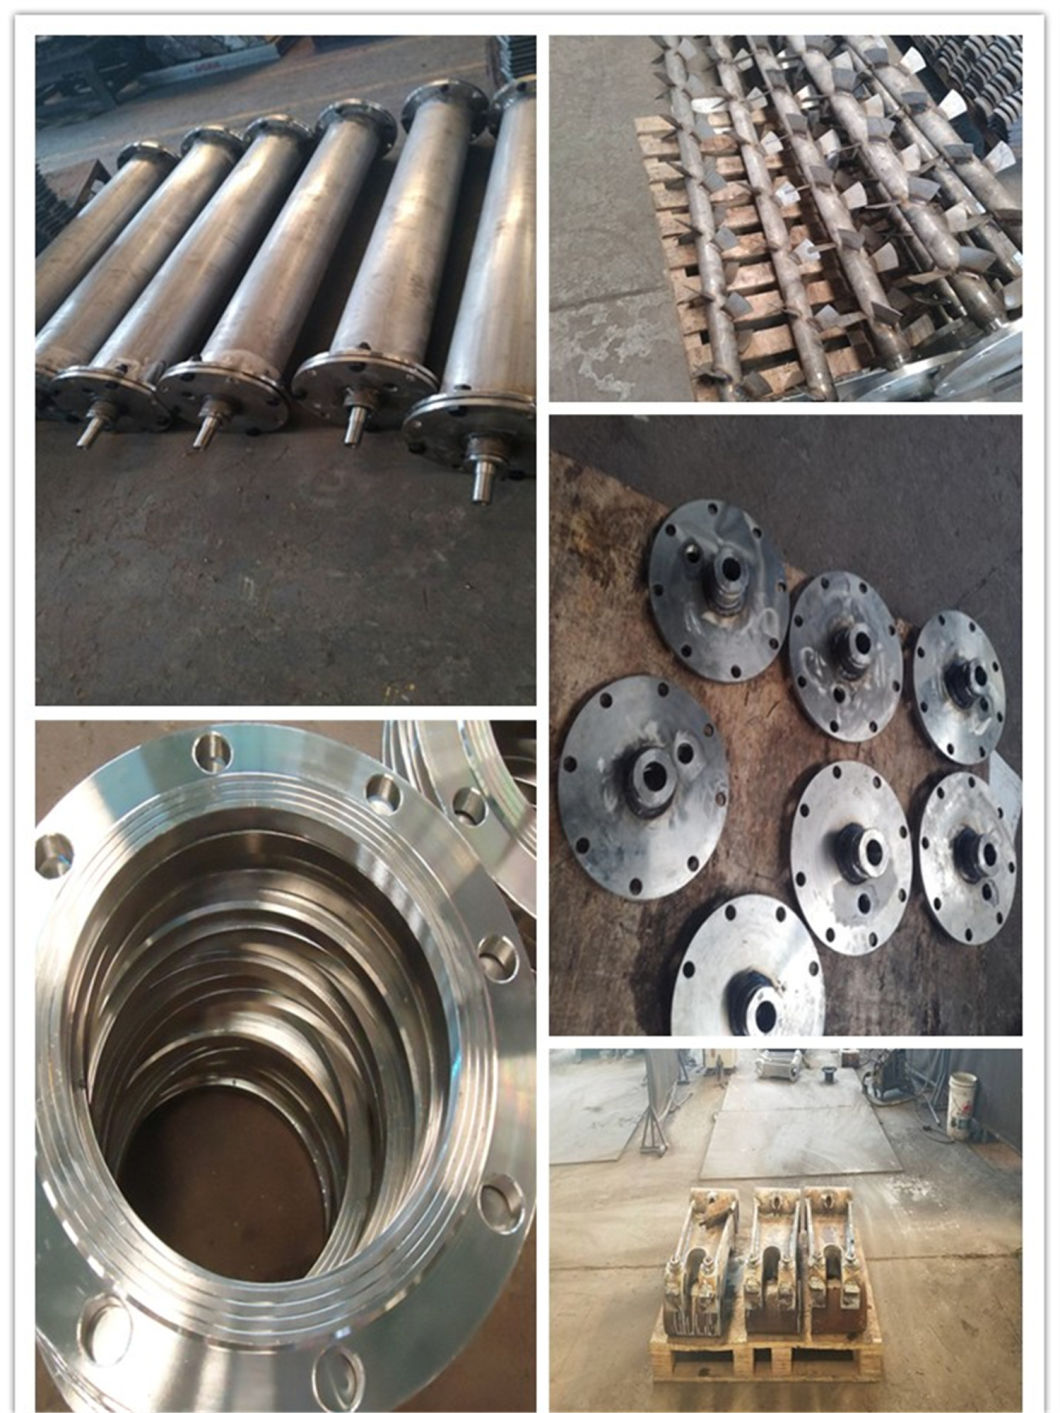 OEM Precision Steel Metal Structural Robot Welding Fabrication Parts